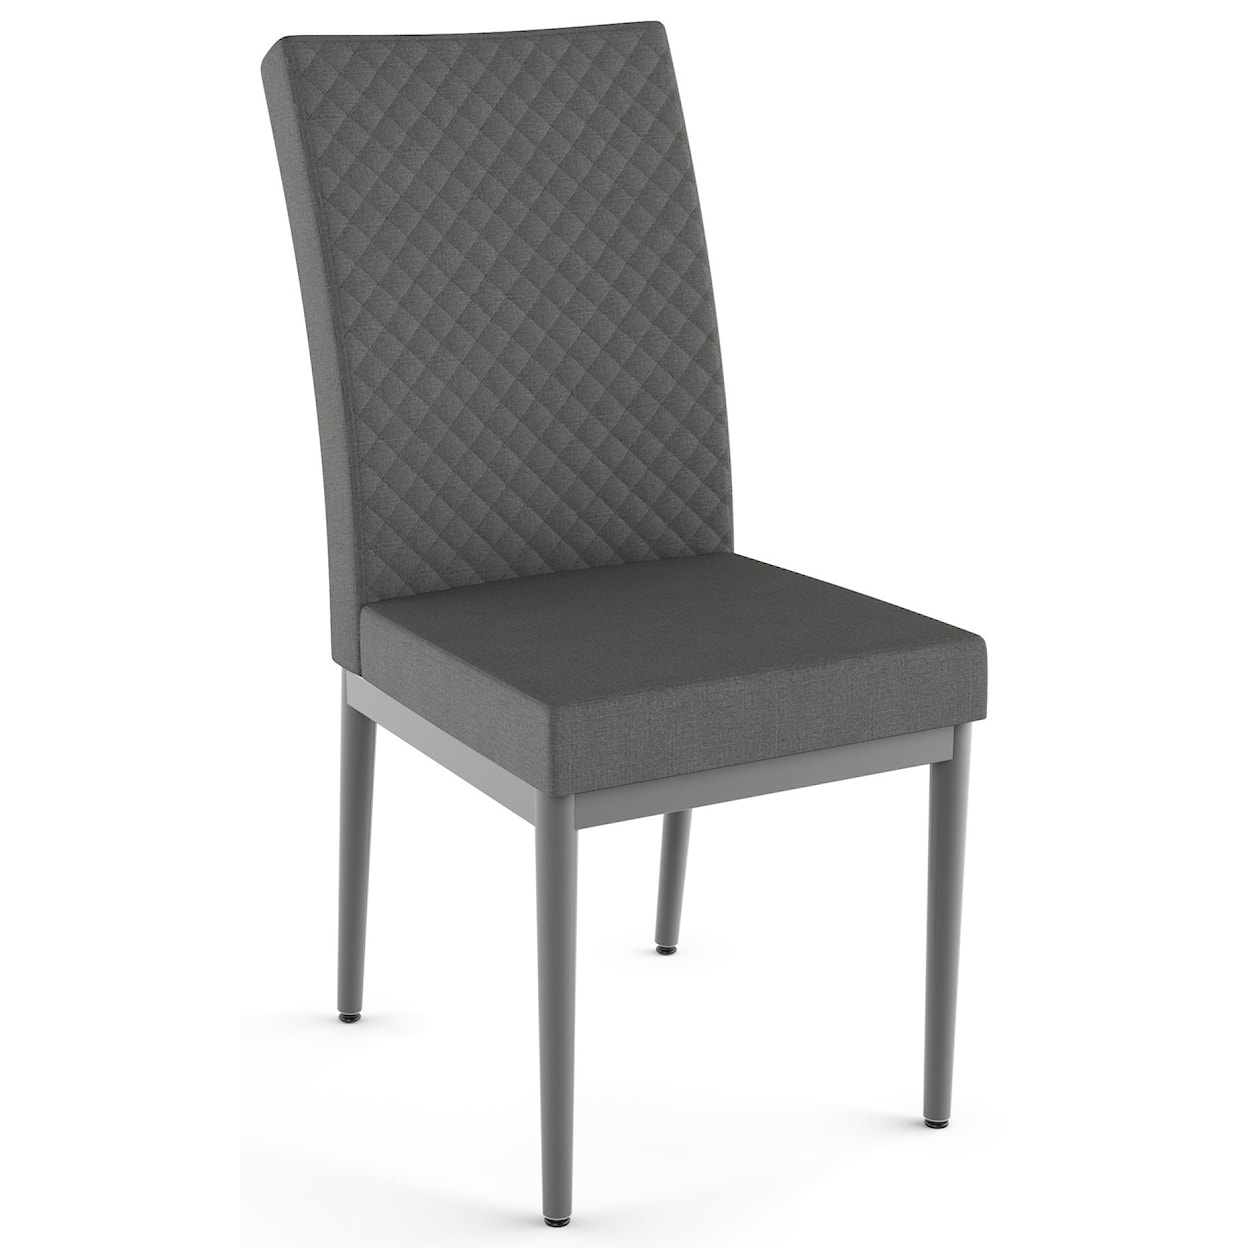 Amisco Urban Marlon Chair with Quilted Fabric